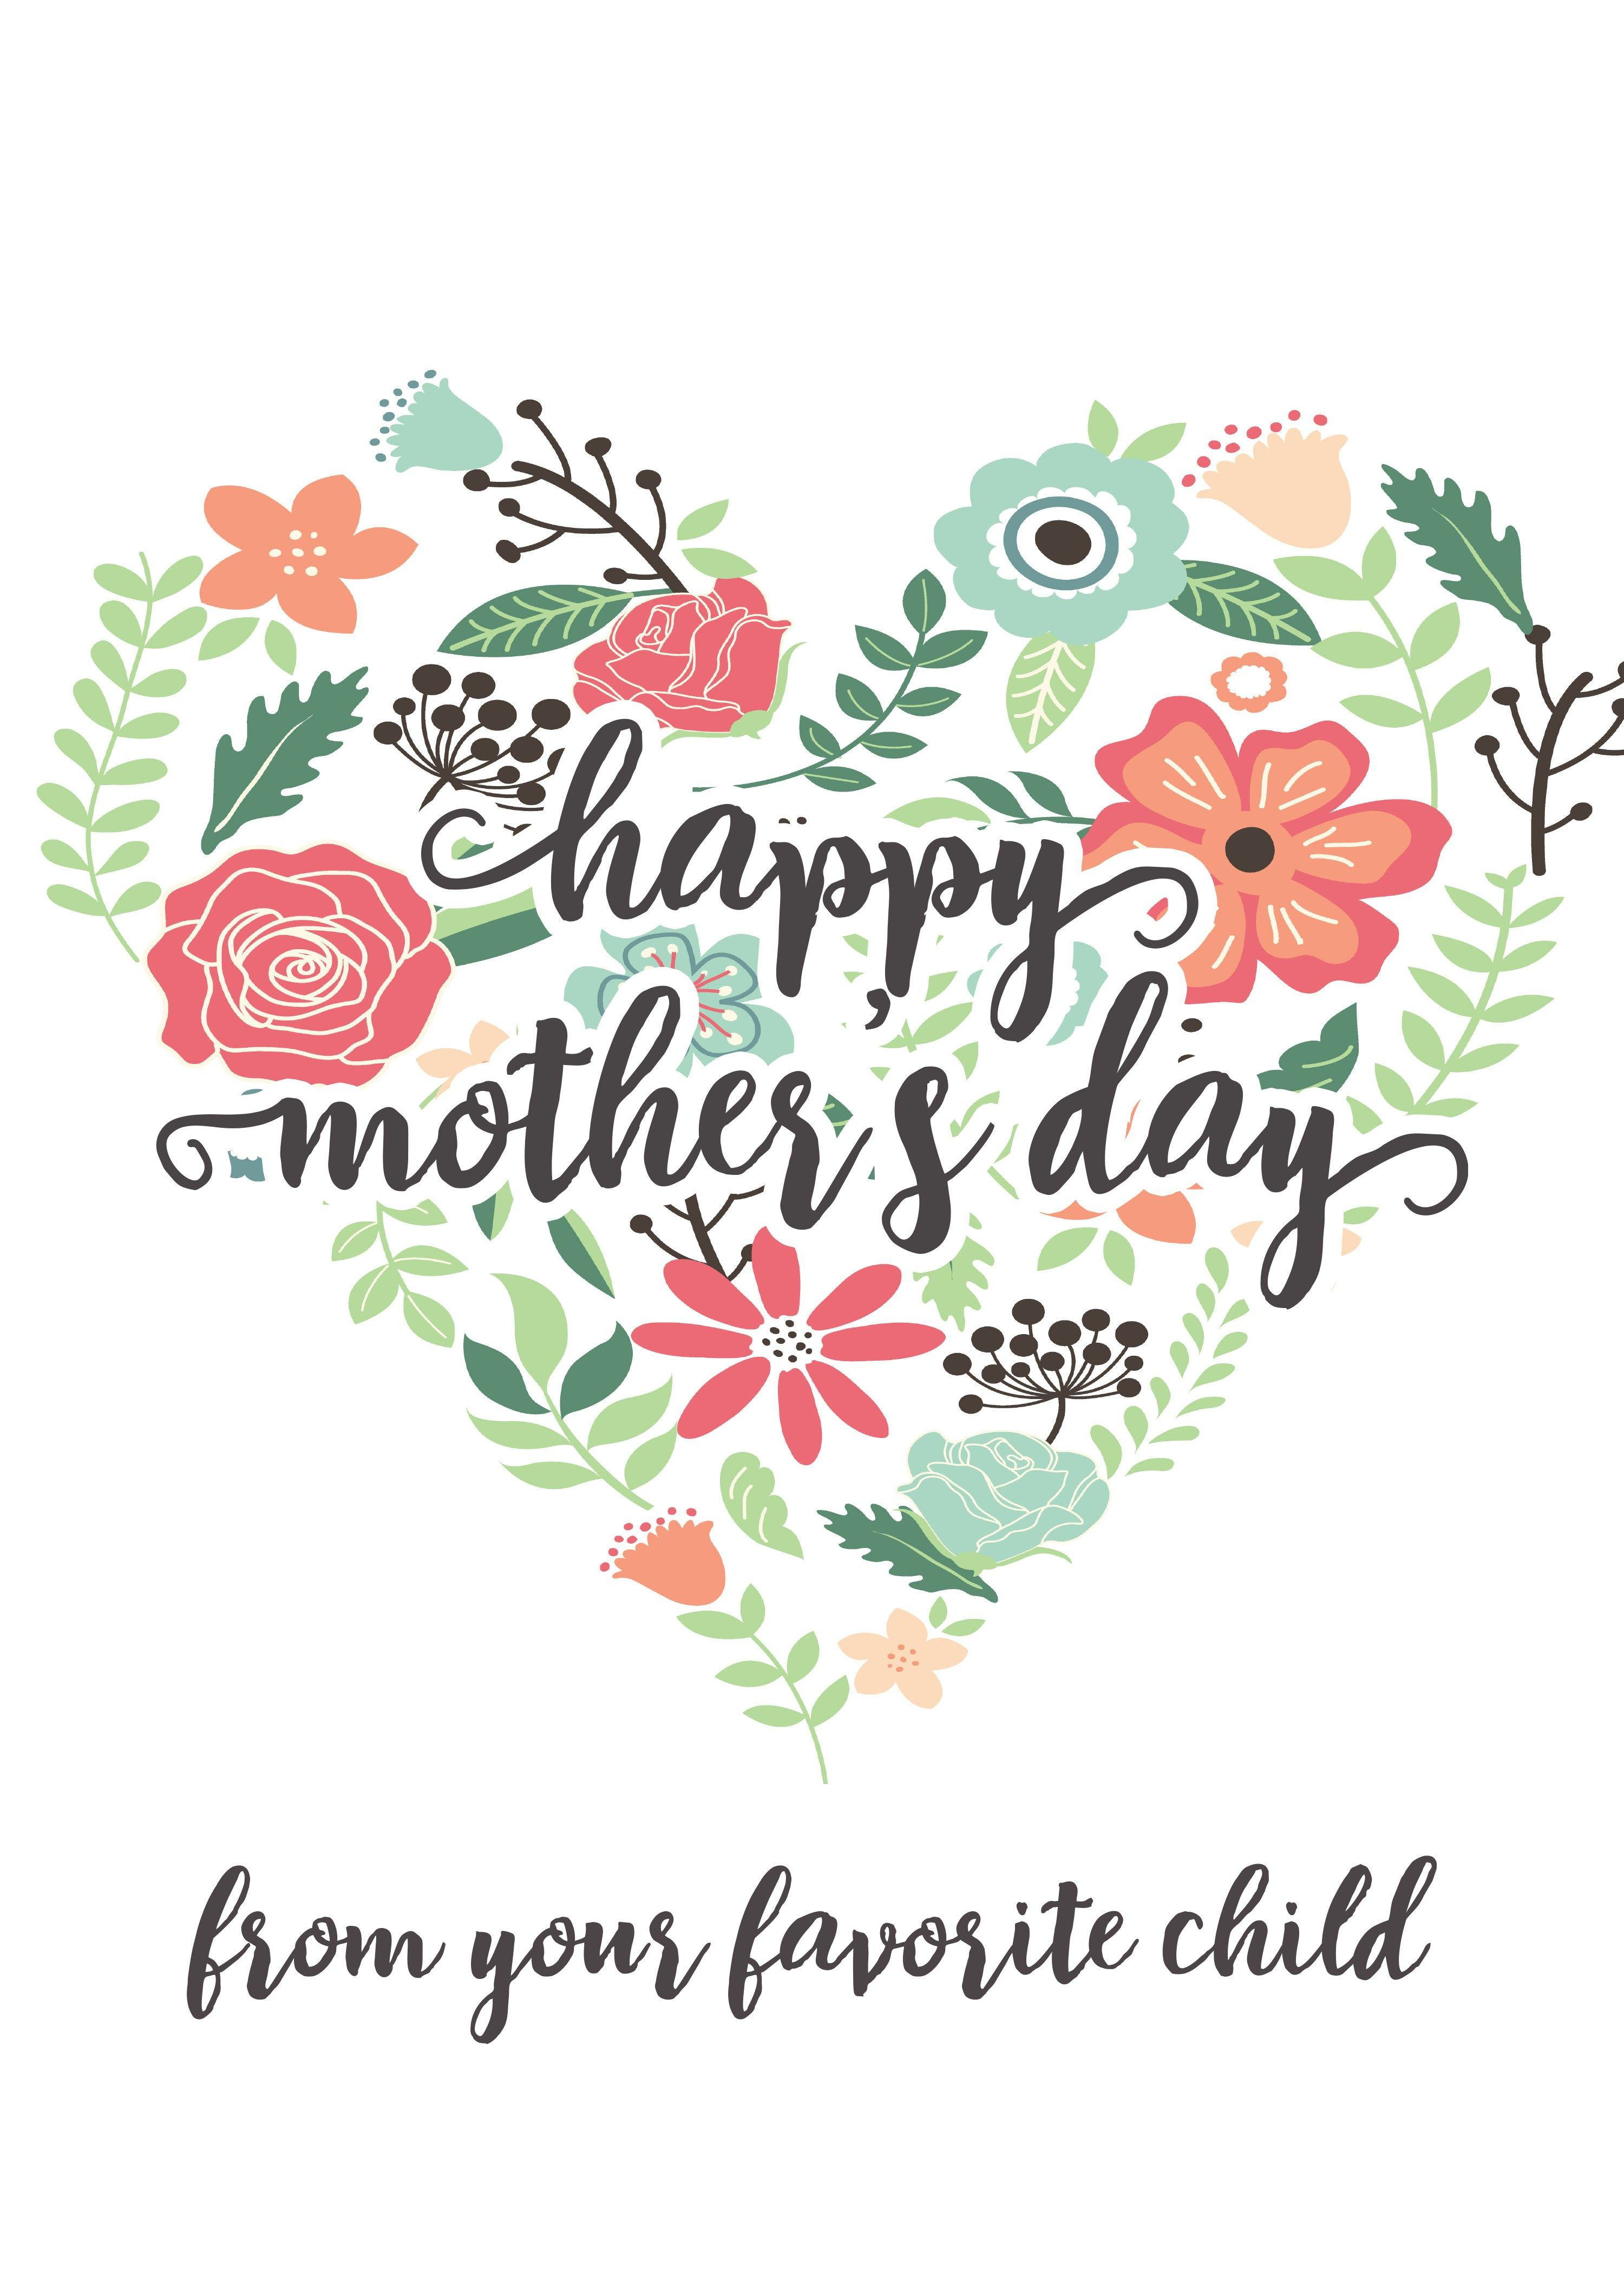 Happy Mothers Day Messages Free Printable Mothers Day Cards - Free Printable Mothers Day Cards From The Dog